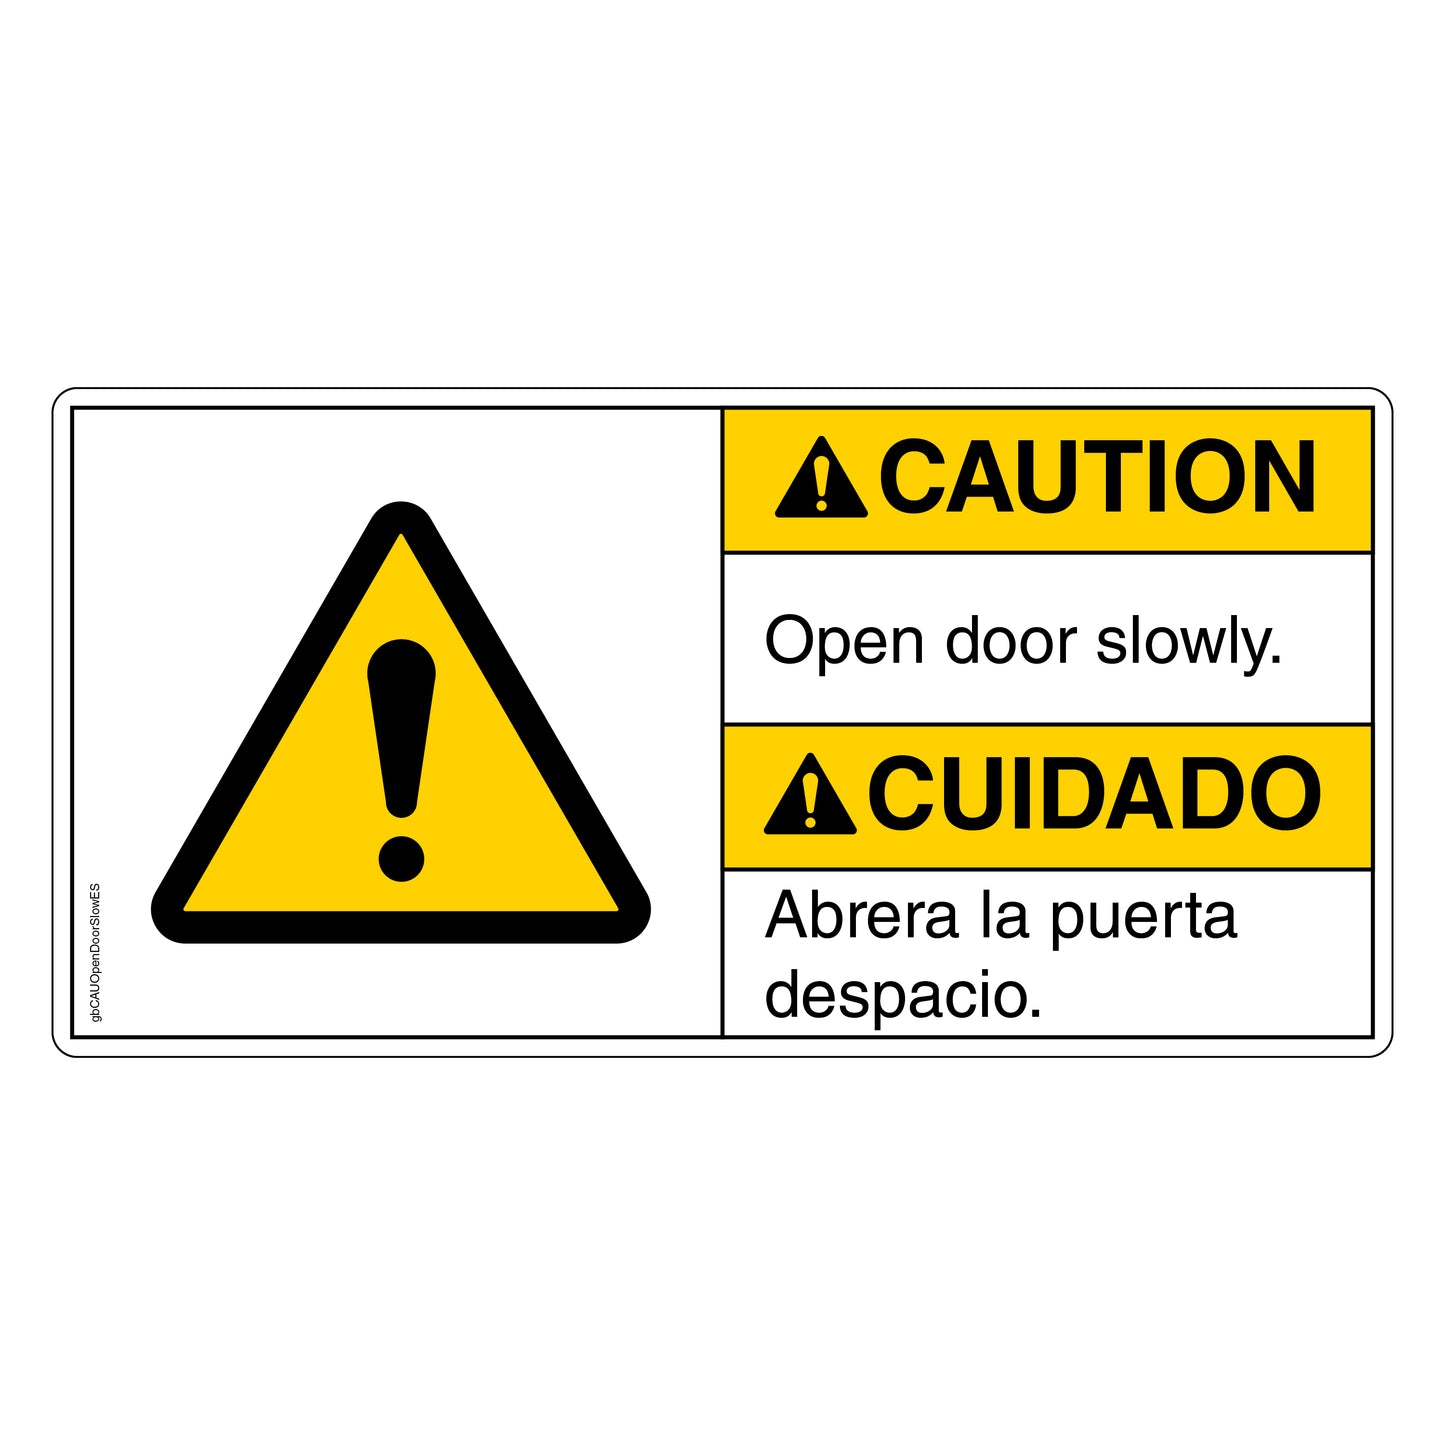 Caution Open Door Slowly Decal in English and Spanish. 